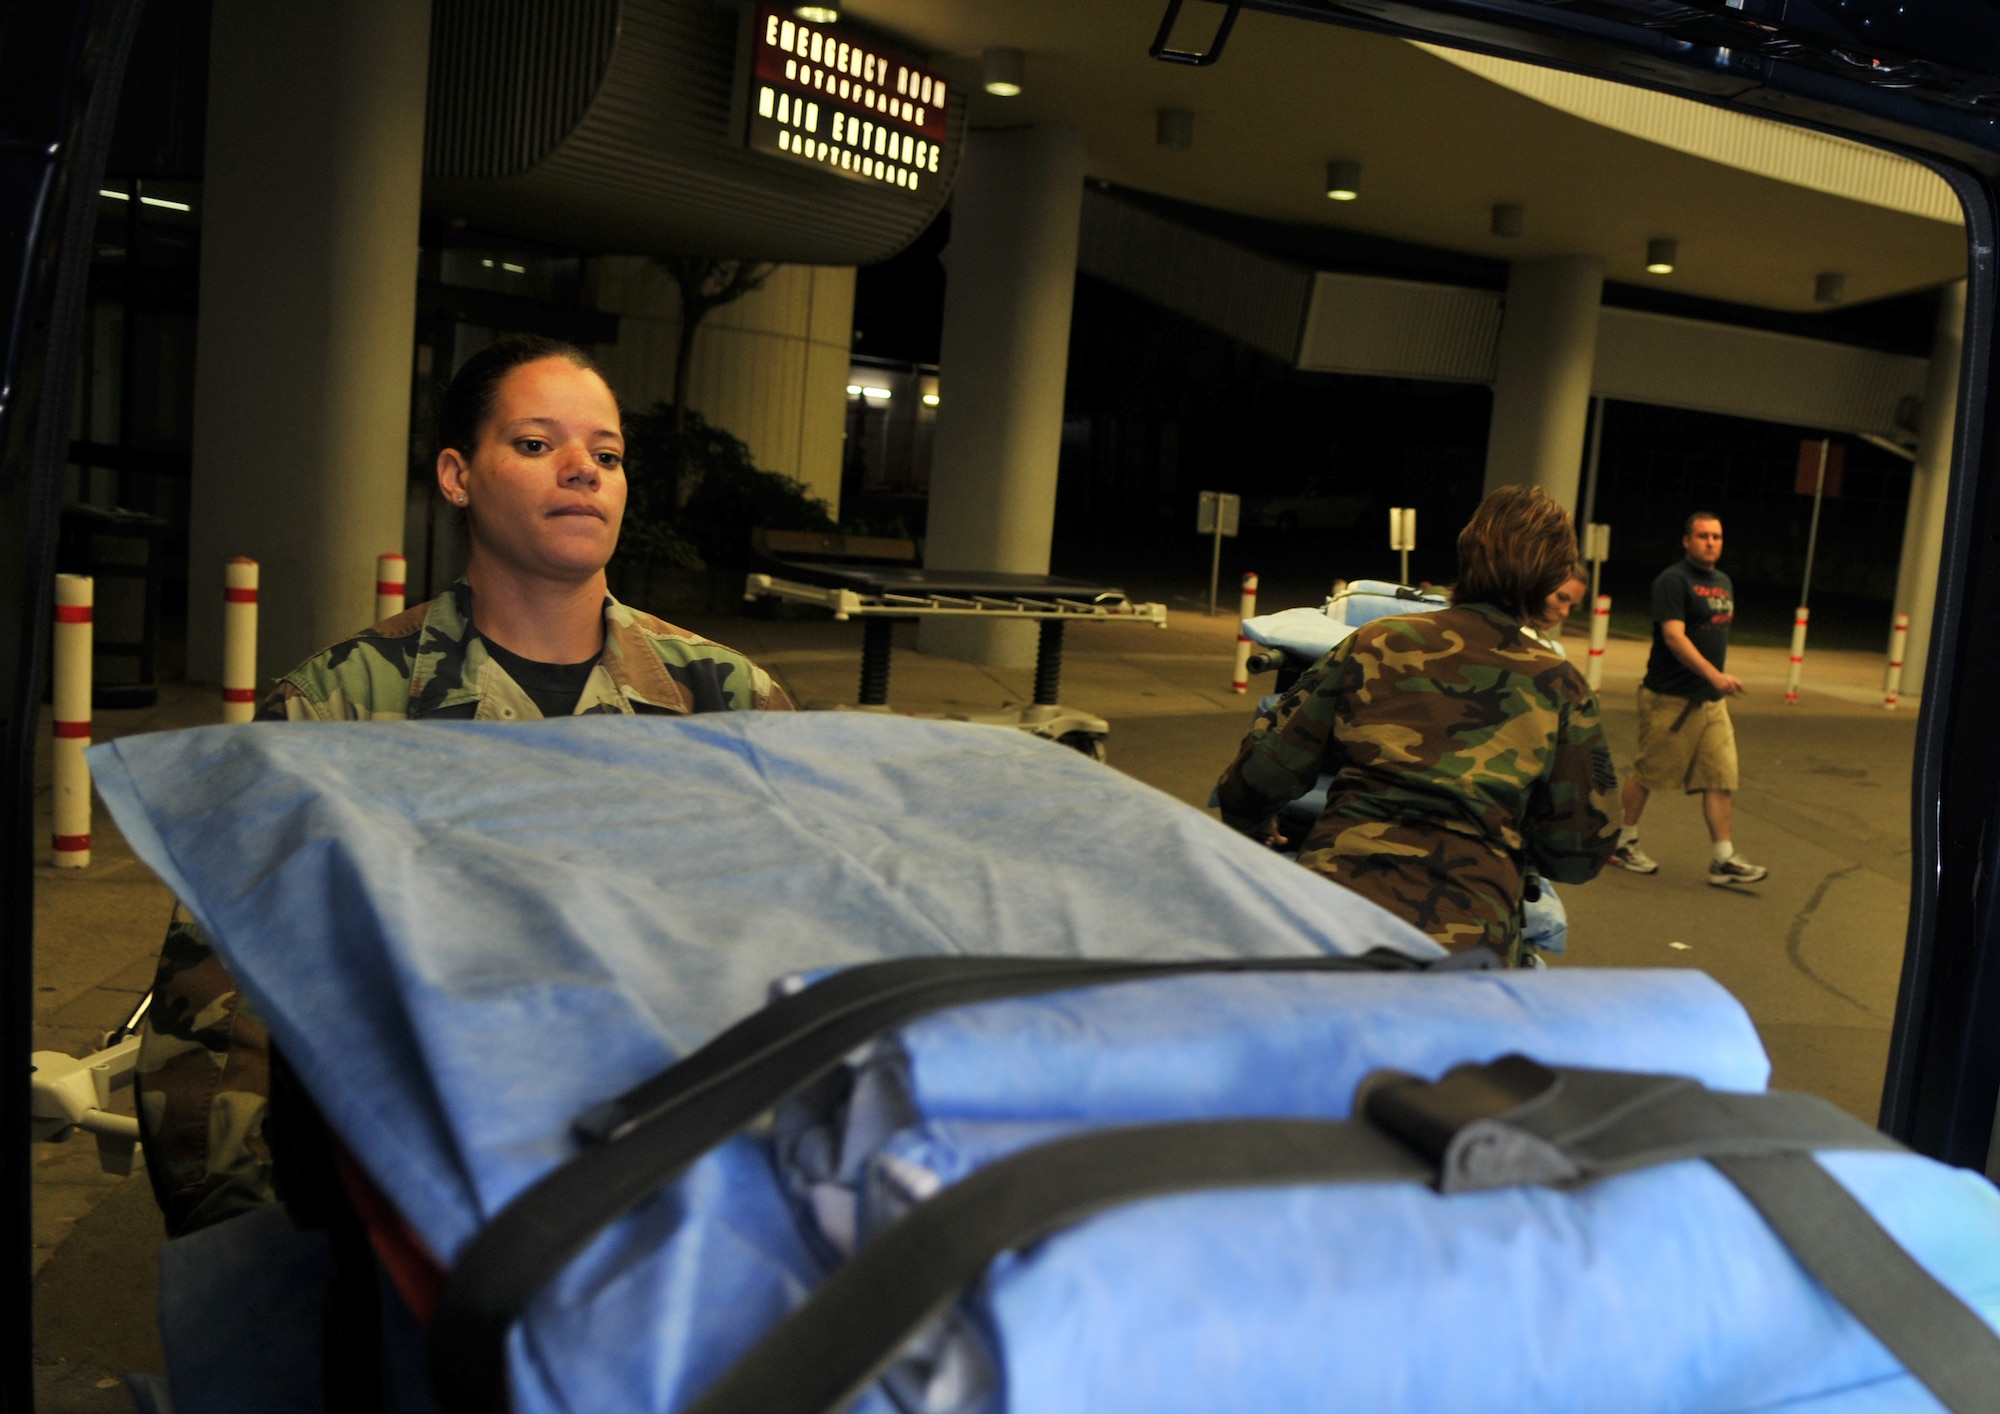 U.S. Air Force Tech. Sgt. Laura Small, 86th Contingency Aeromedical Staging Facility medical technician, unloads gurneys at Landstuhl Regional Medical Center, Aug. 27, 2009. The gurneys will be used to transport wound warriors to an aircraft taking them to Walter Reed Army Medical Center for further medical treatment. (U.S. Air Force photo by Senior Airman Nathan Lipscomb)